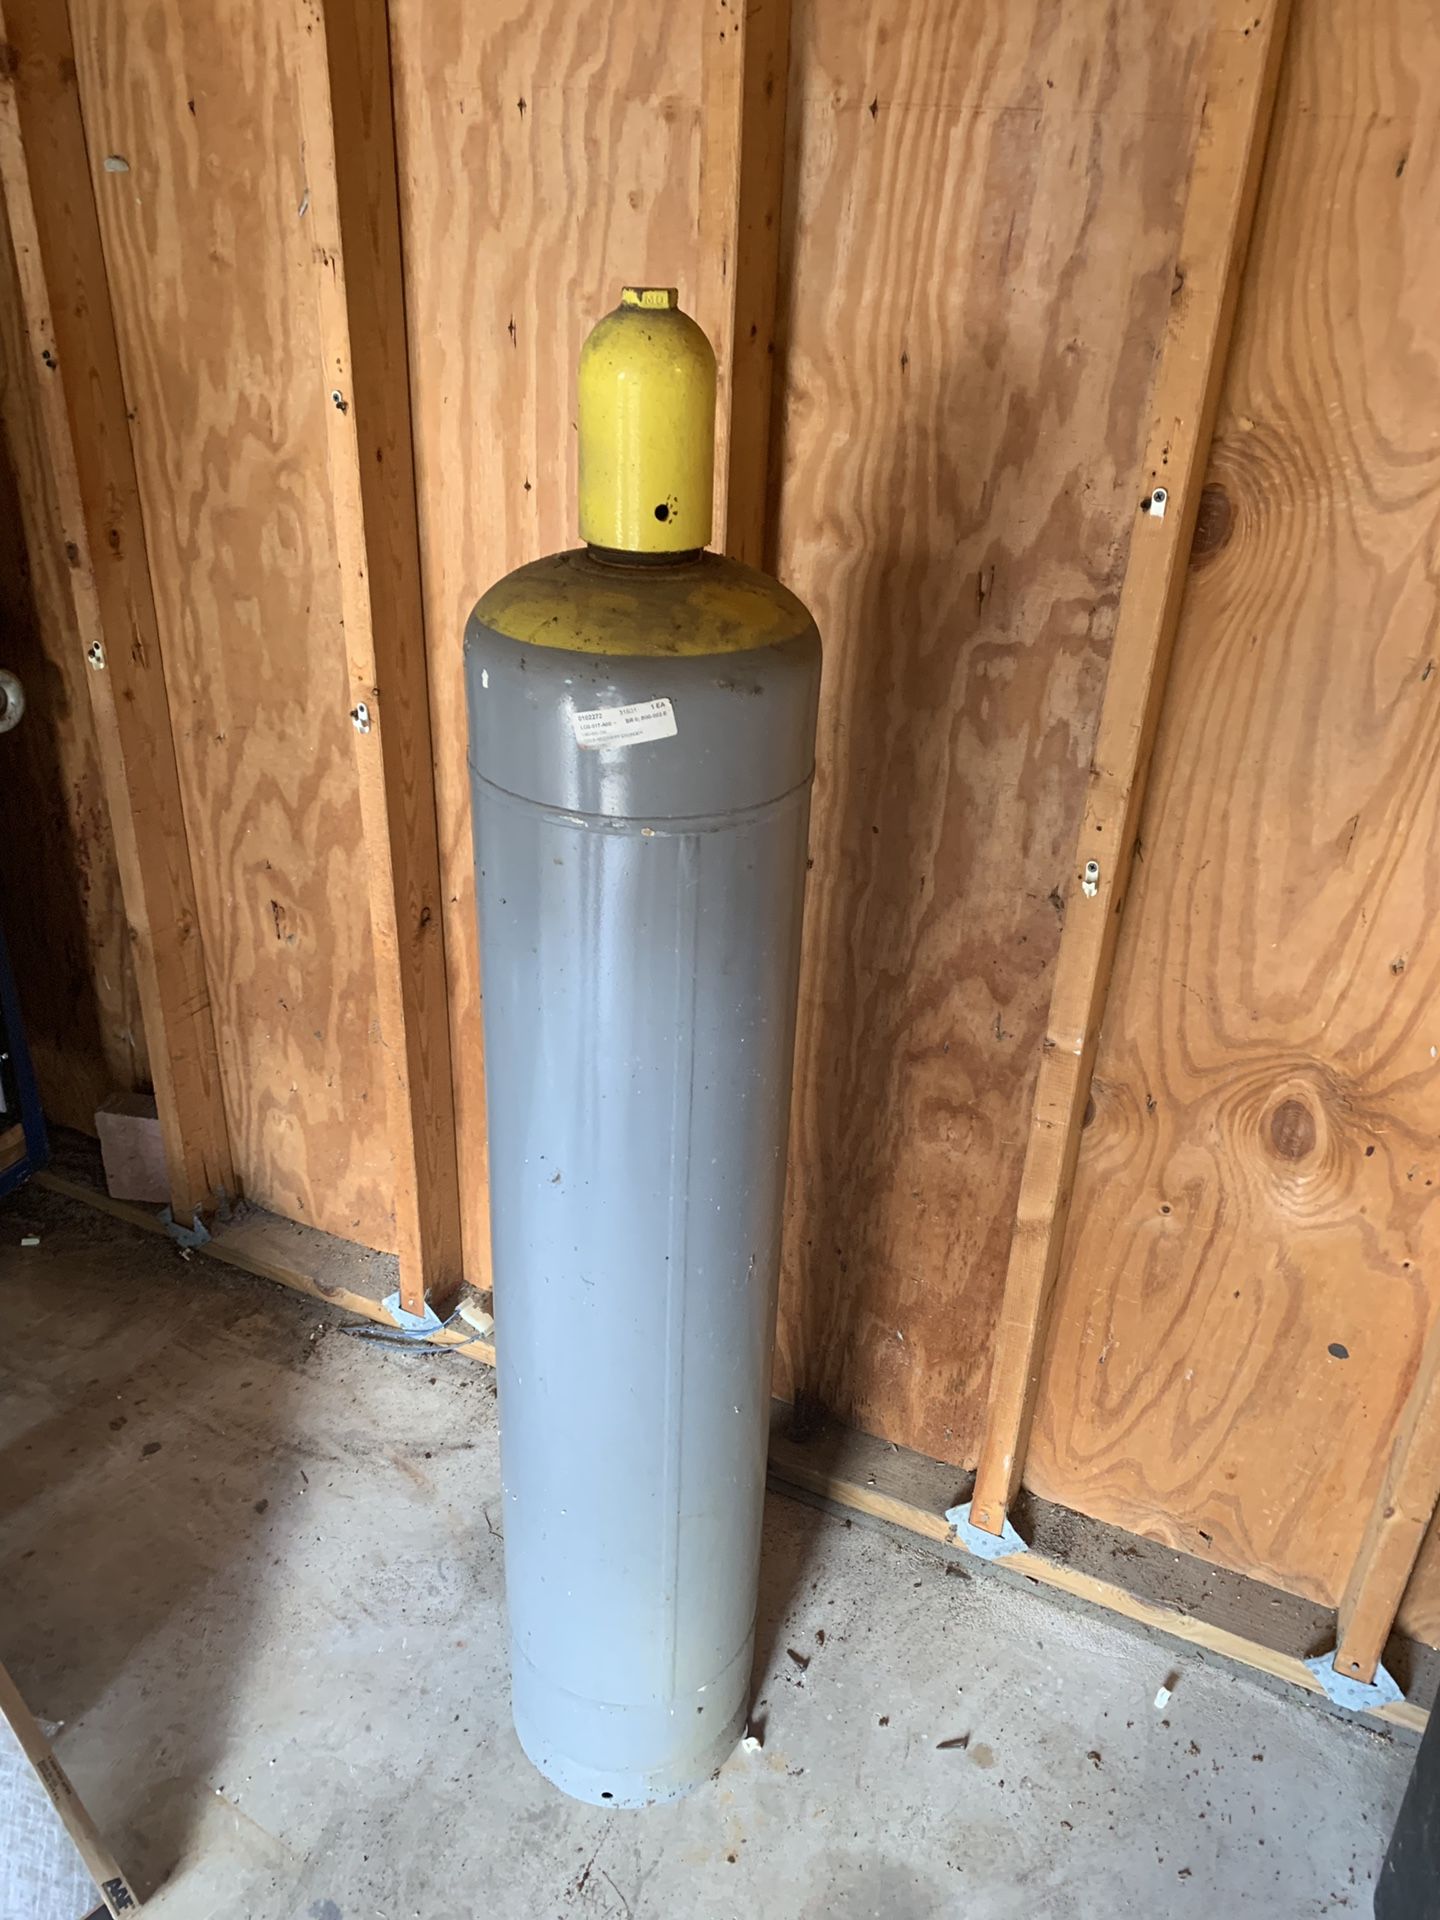 Freon recovery tank